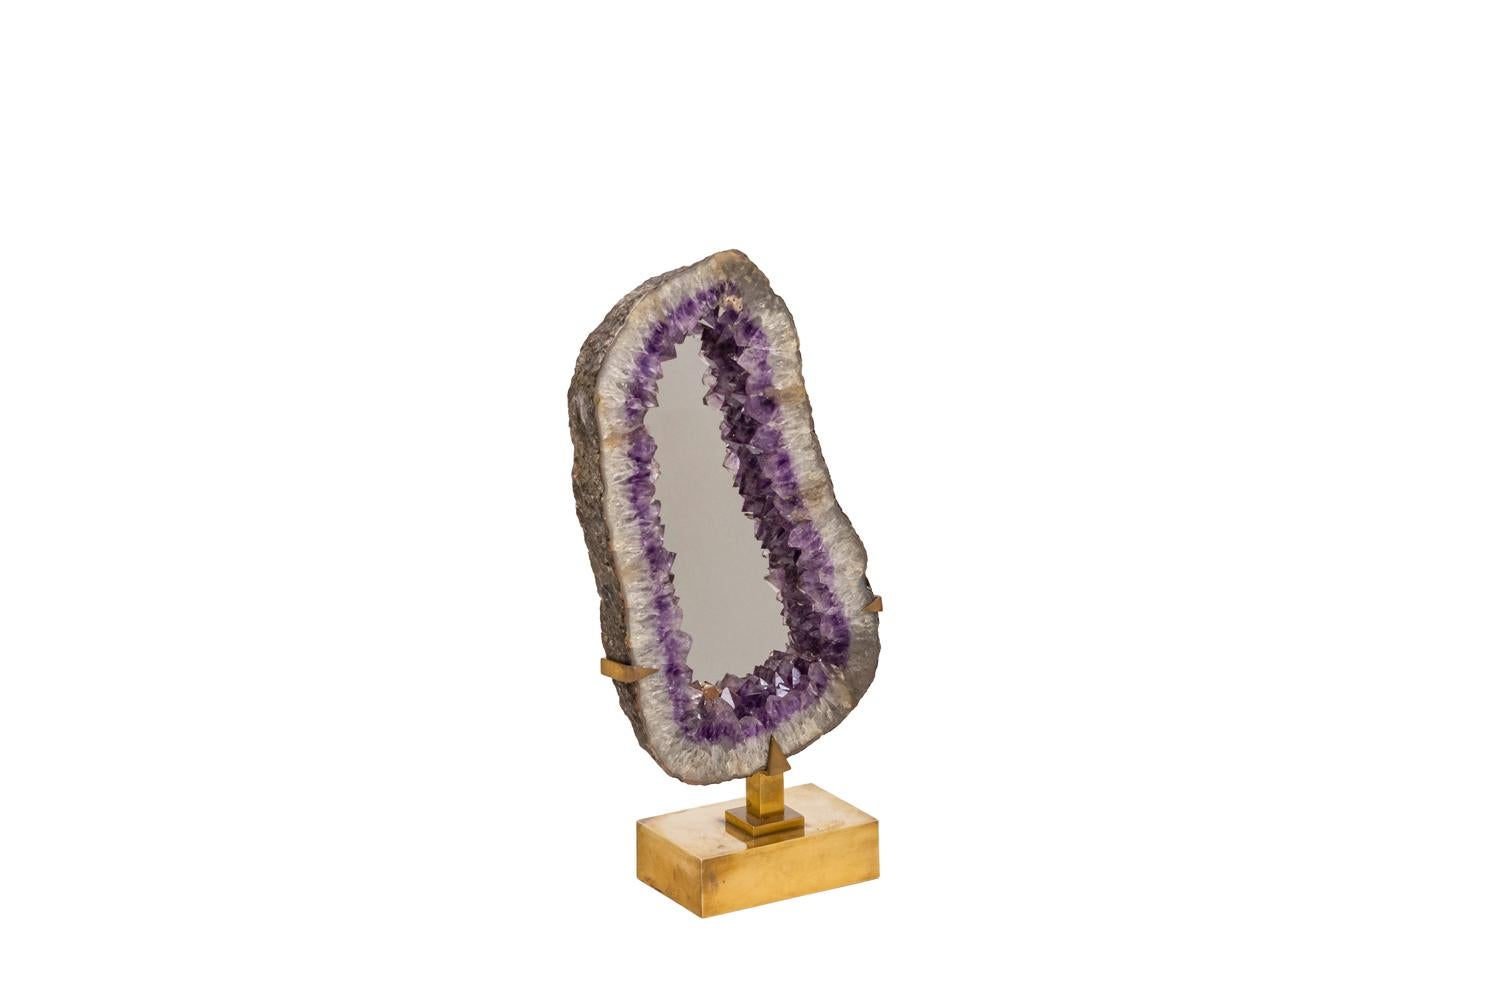 Willy Daro, attributed to. 

Mirror decorated with amethysts mounted on a gilt brass base. 

Work realized in the 1970s.